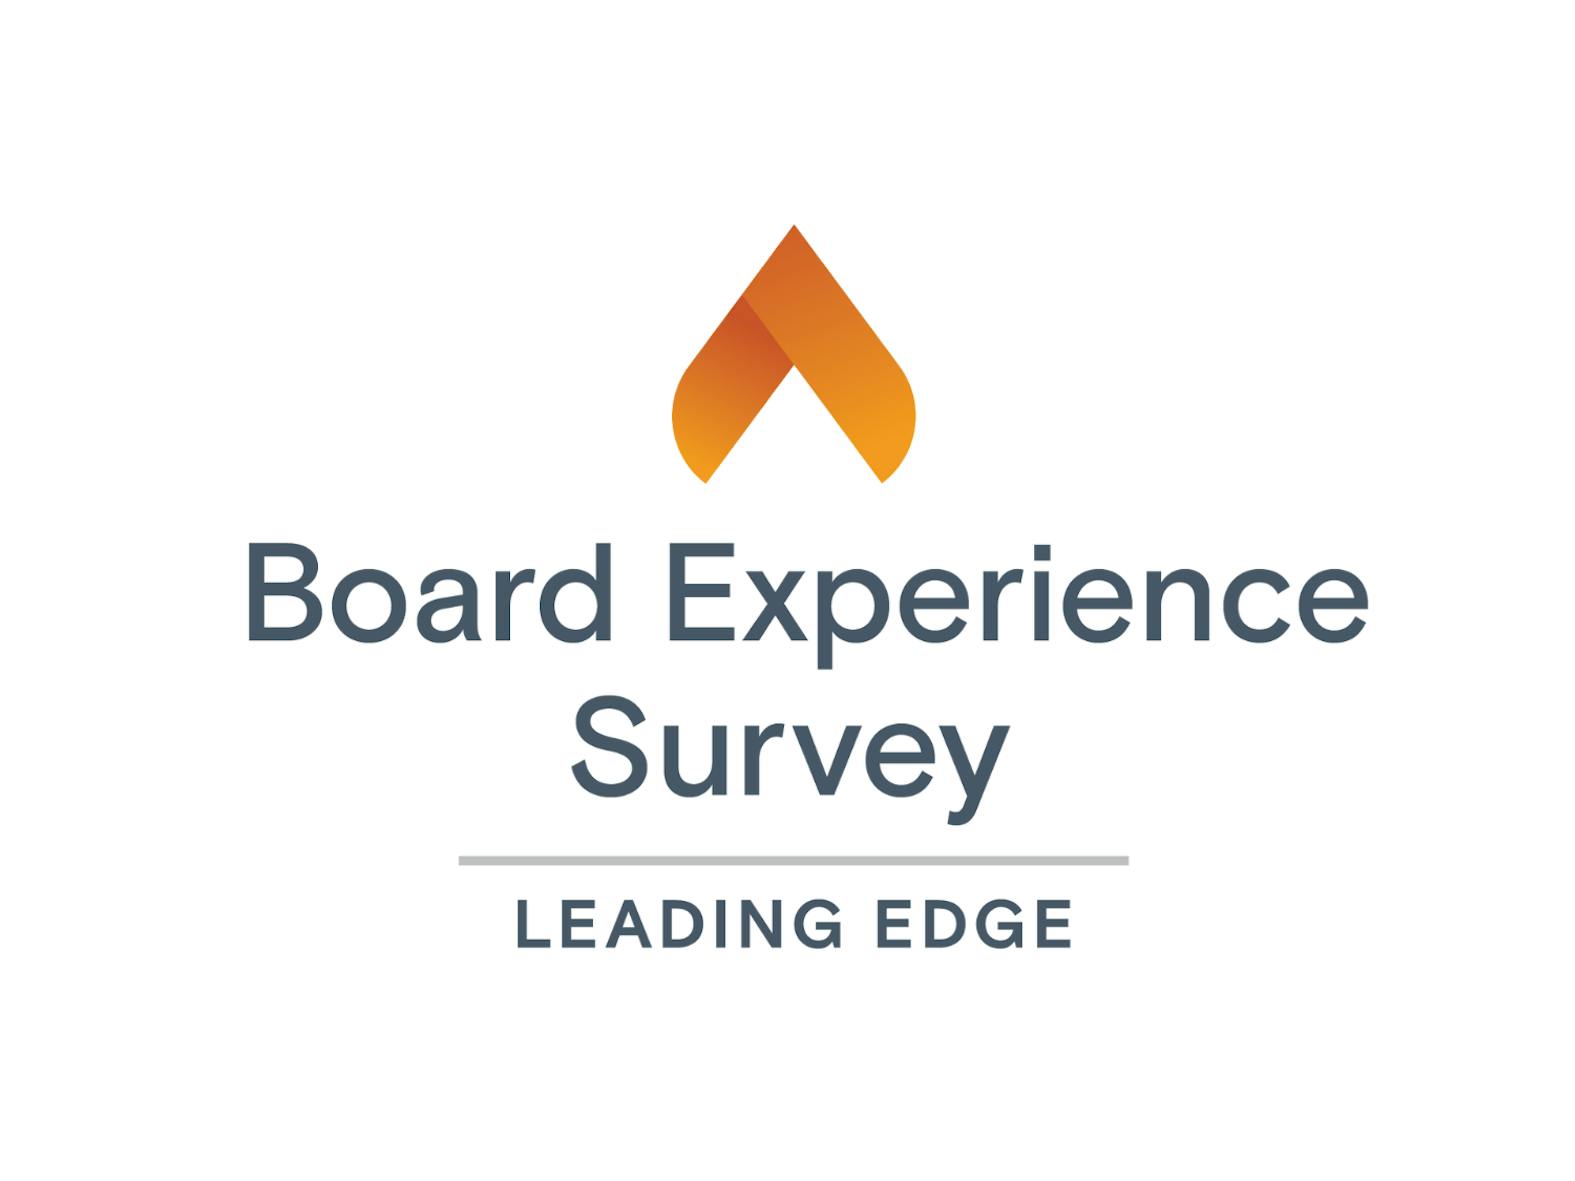 Board Experience Survey by Leading Edge